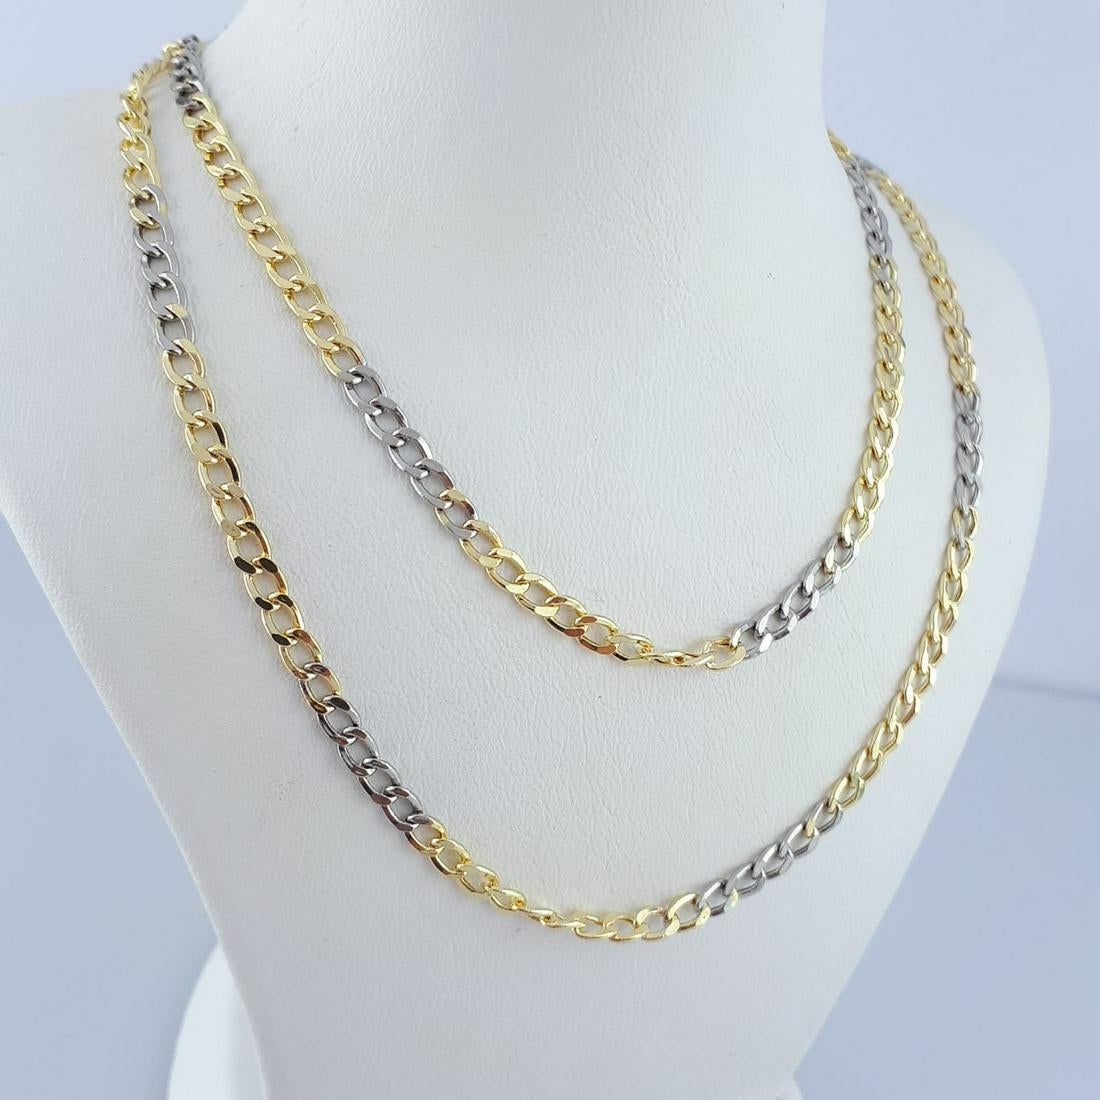 14K Yellow and White Gold - Necklace - Image 2 of 5